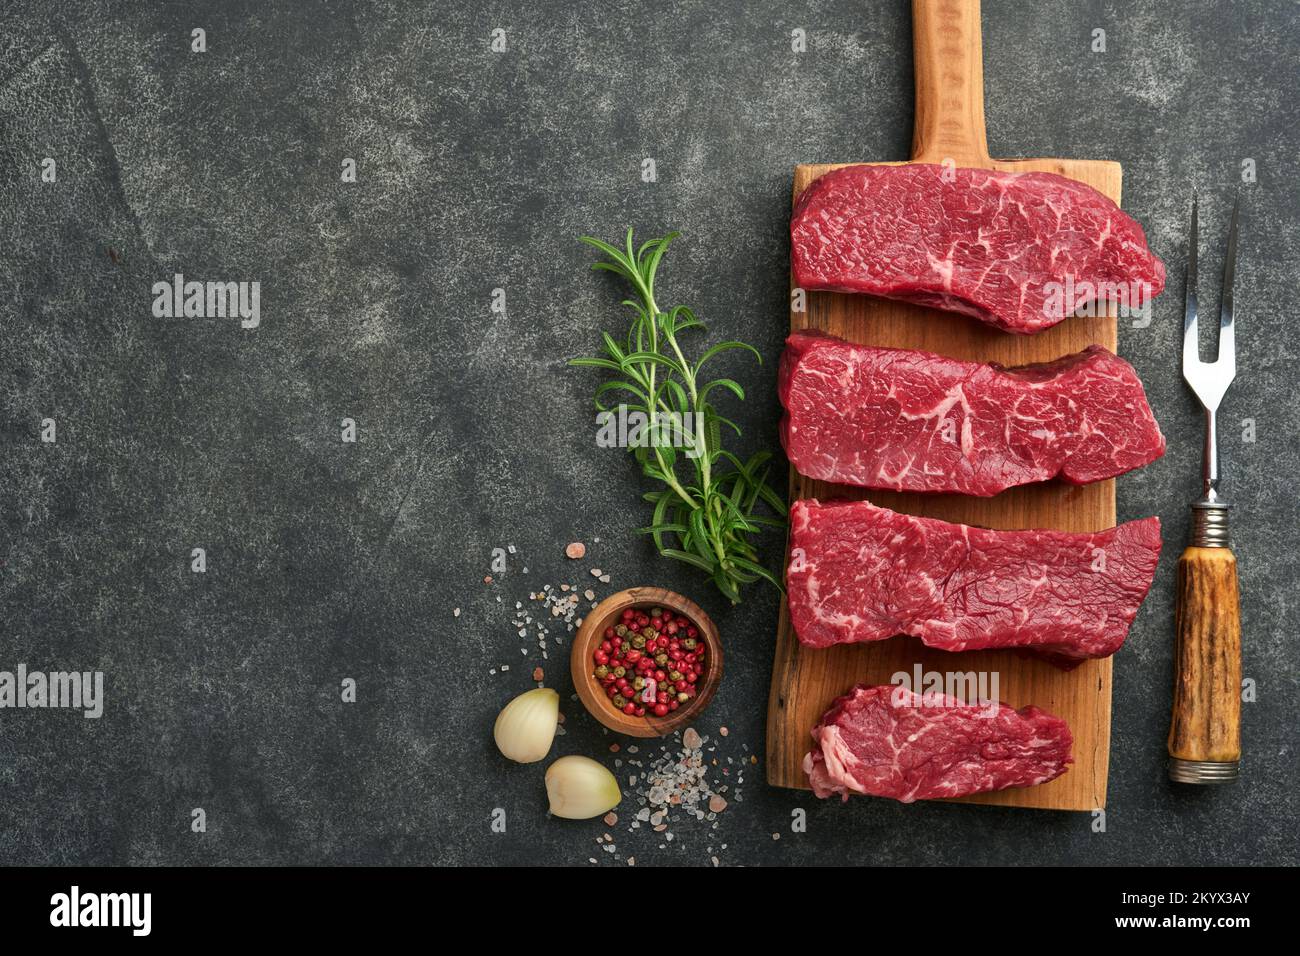 Raw steaks. Top blade steaks on wood burning board with spices, rosemary, vegetables and ingredients for cooking on black background. Top view.  Copy Stock Photo